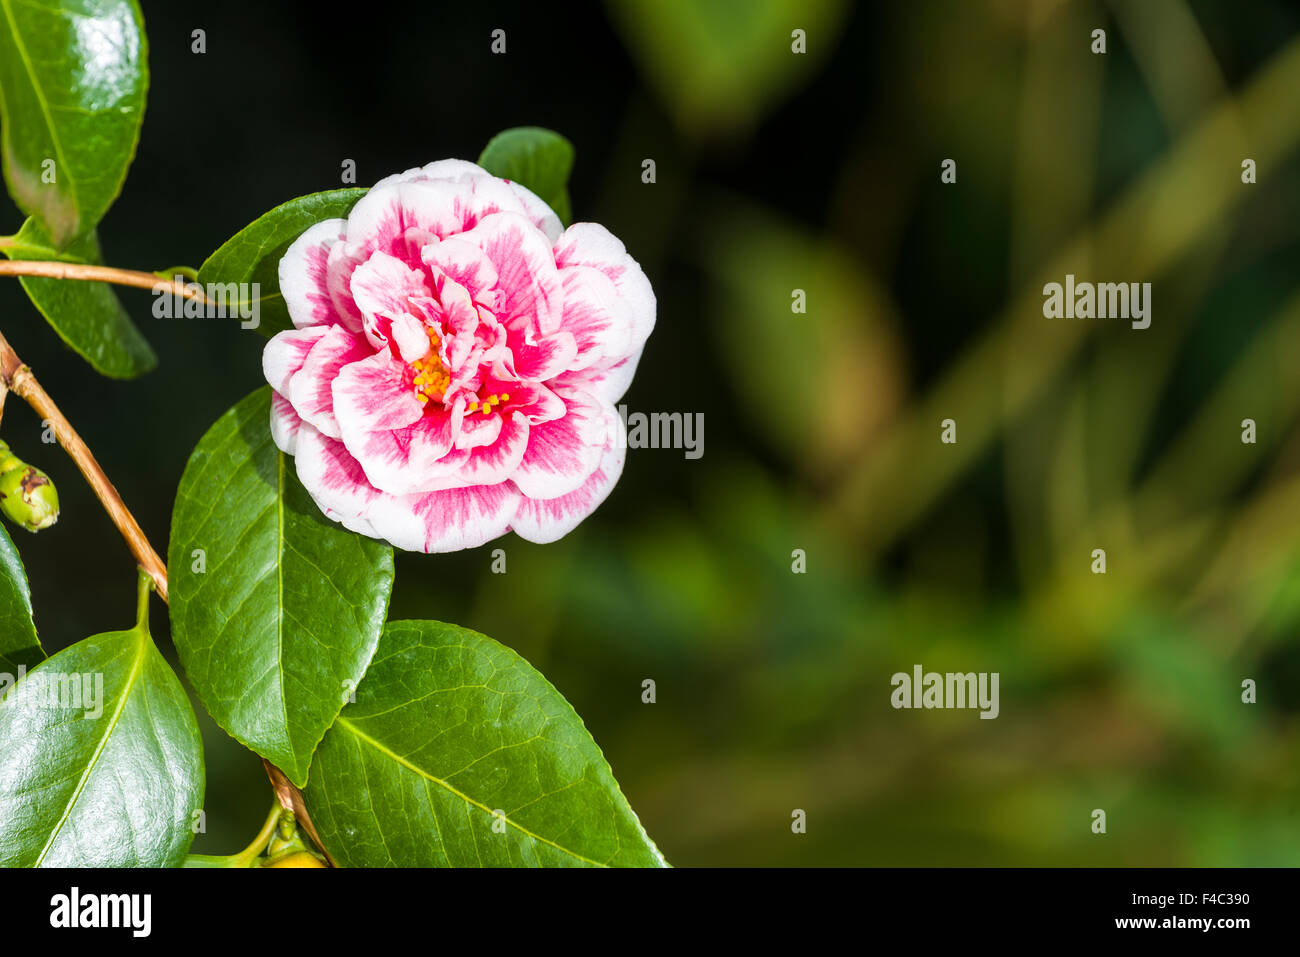 A blooming red blossom of a Camellia (Camellia japonica) Stock Photo